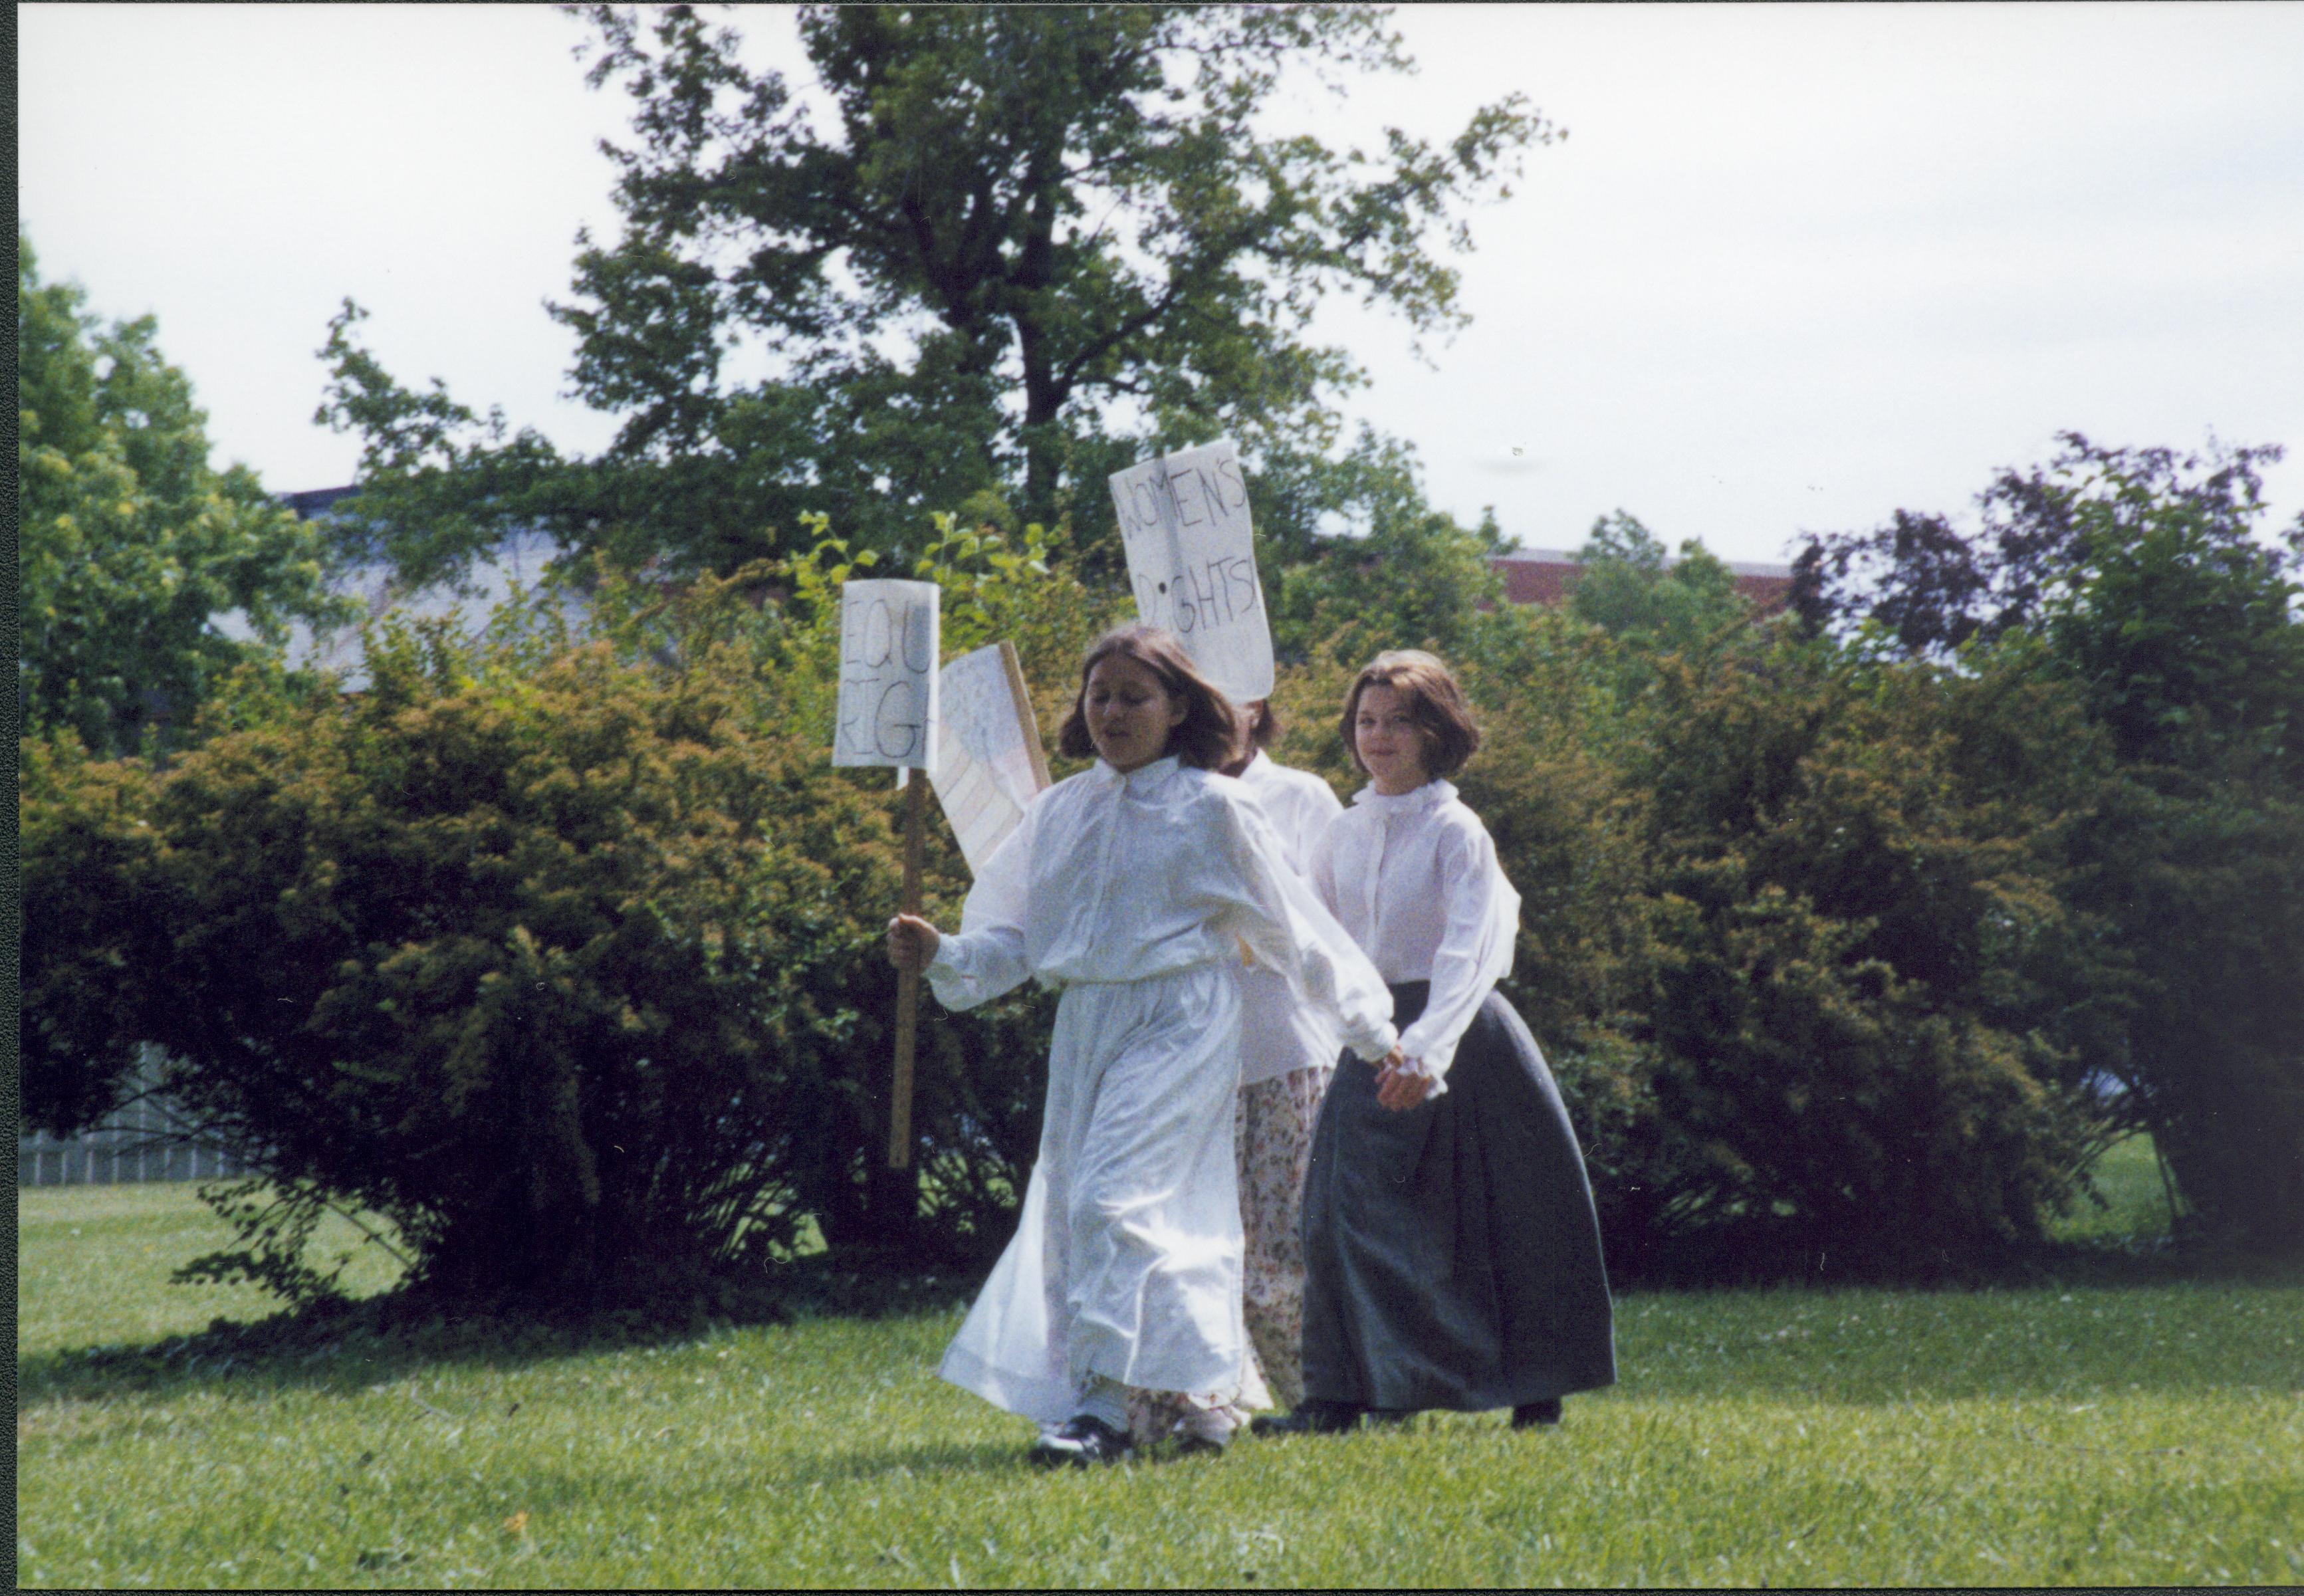 Iles School Living History program - students portraying Women's Rights suffragettes in the Carrigan lot (Block 10, Lot 6).  Looking Northeast from 8th Street (zoomed in) Iles School, living history, students, Carrigan, Women's Rights